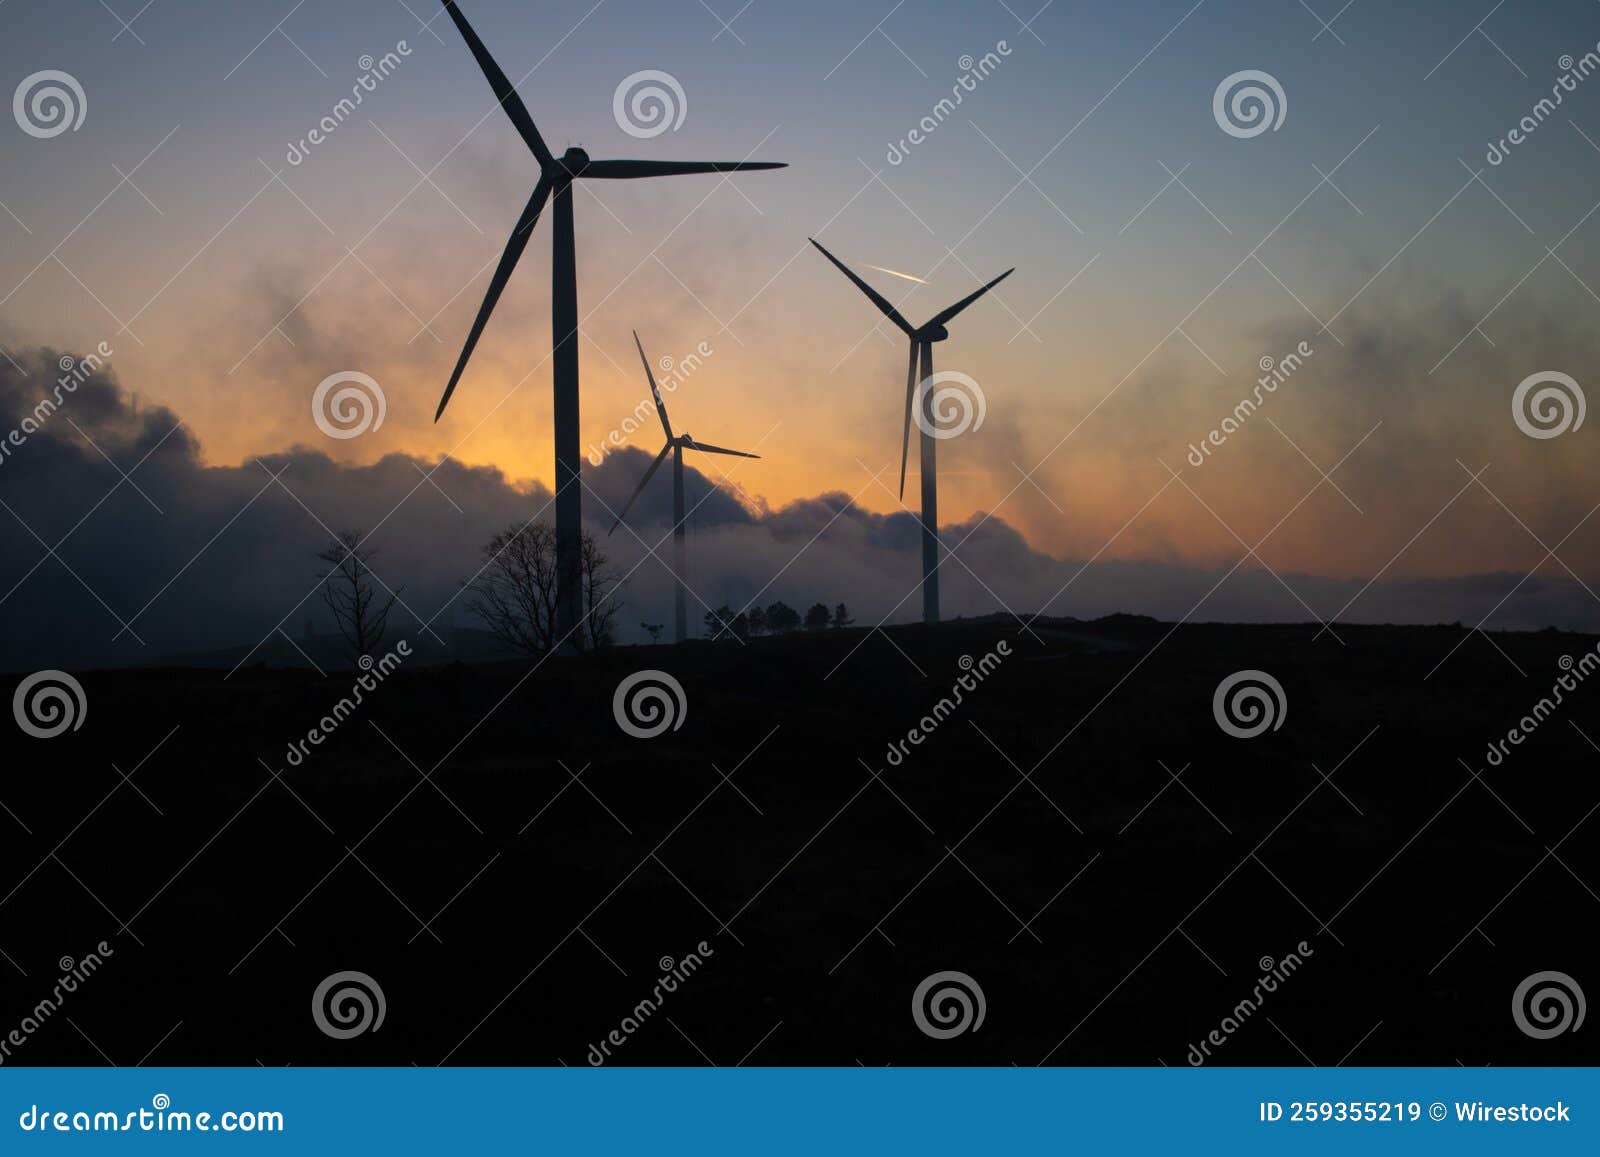 Beautiful Shot Of Windmills In A Field During The Sunset Stock Image